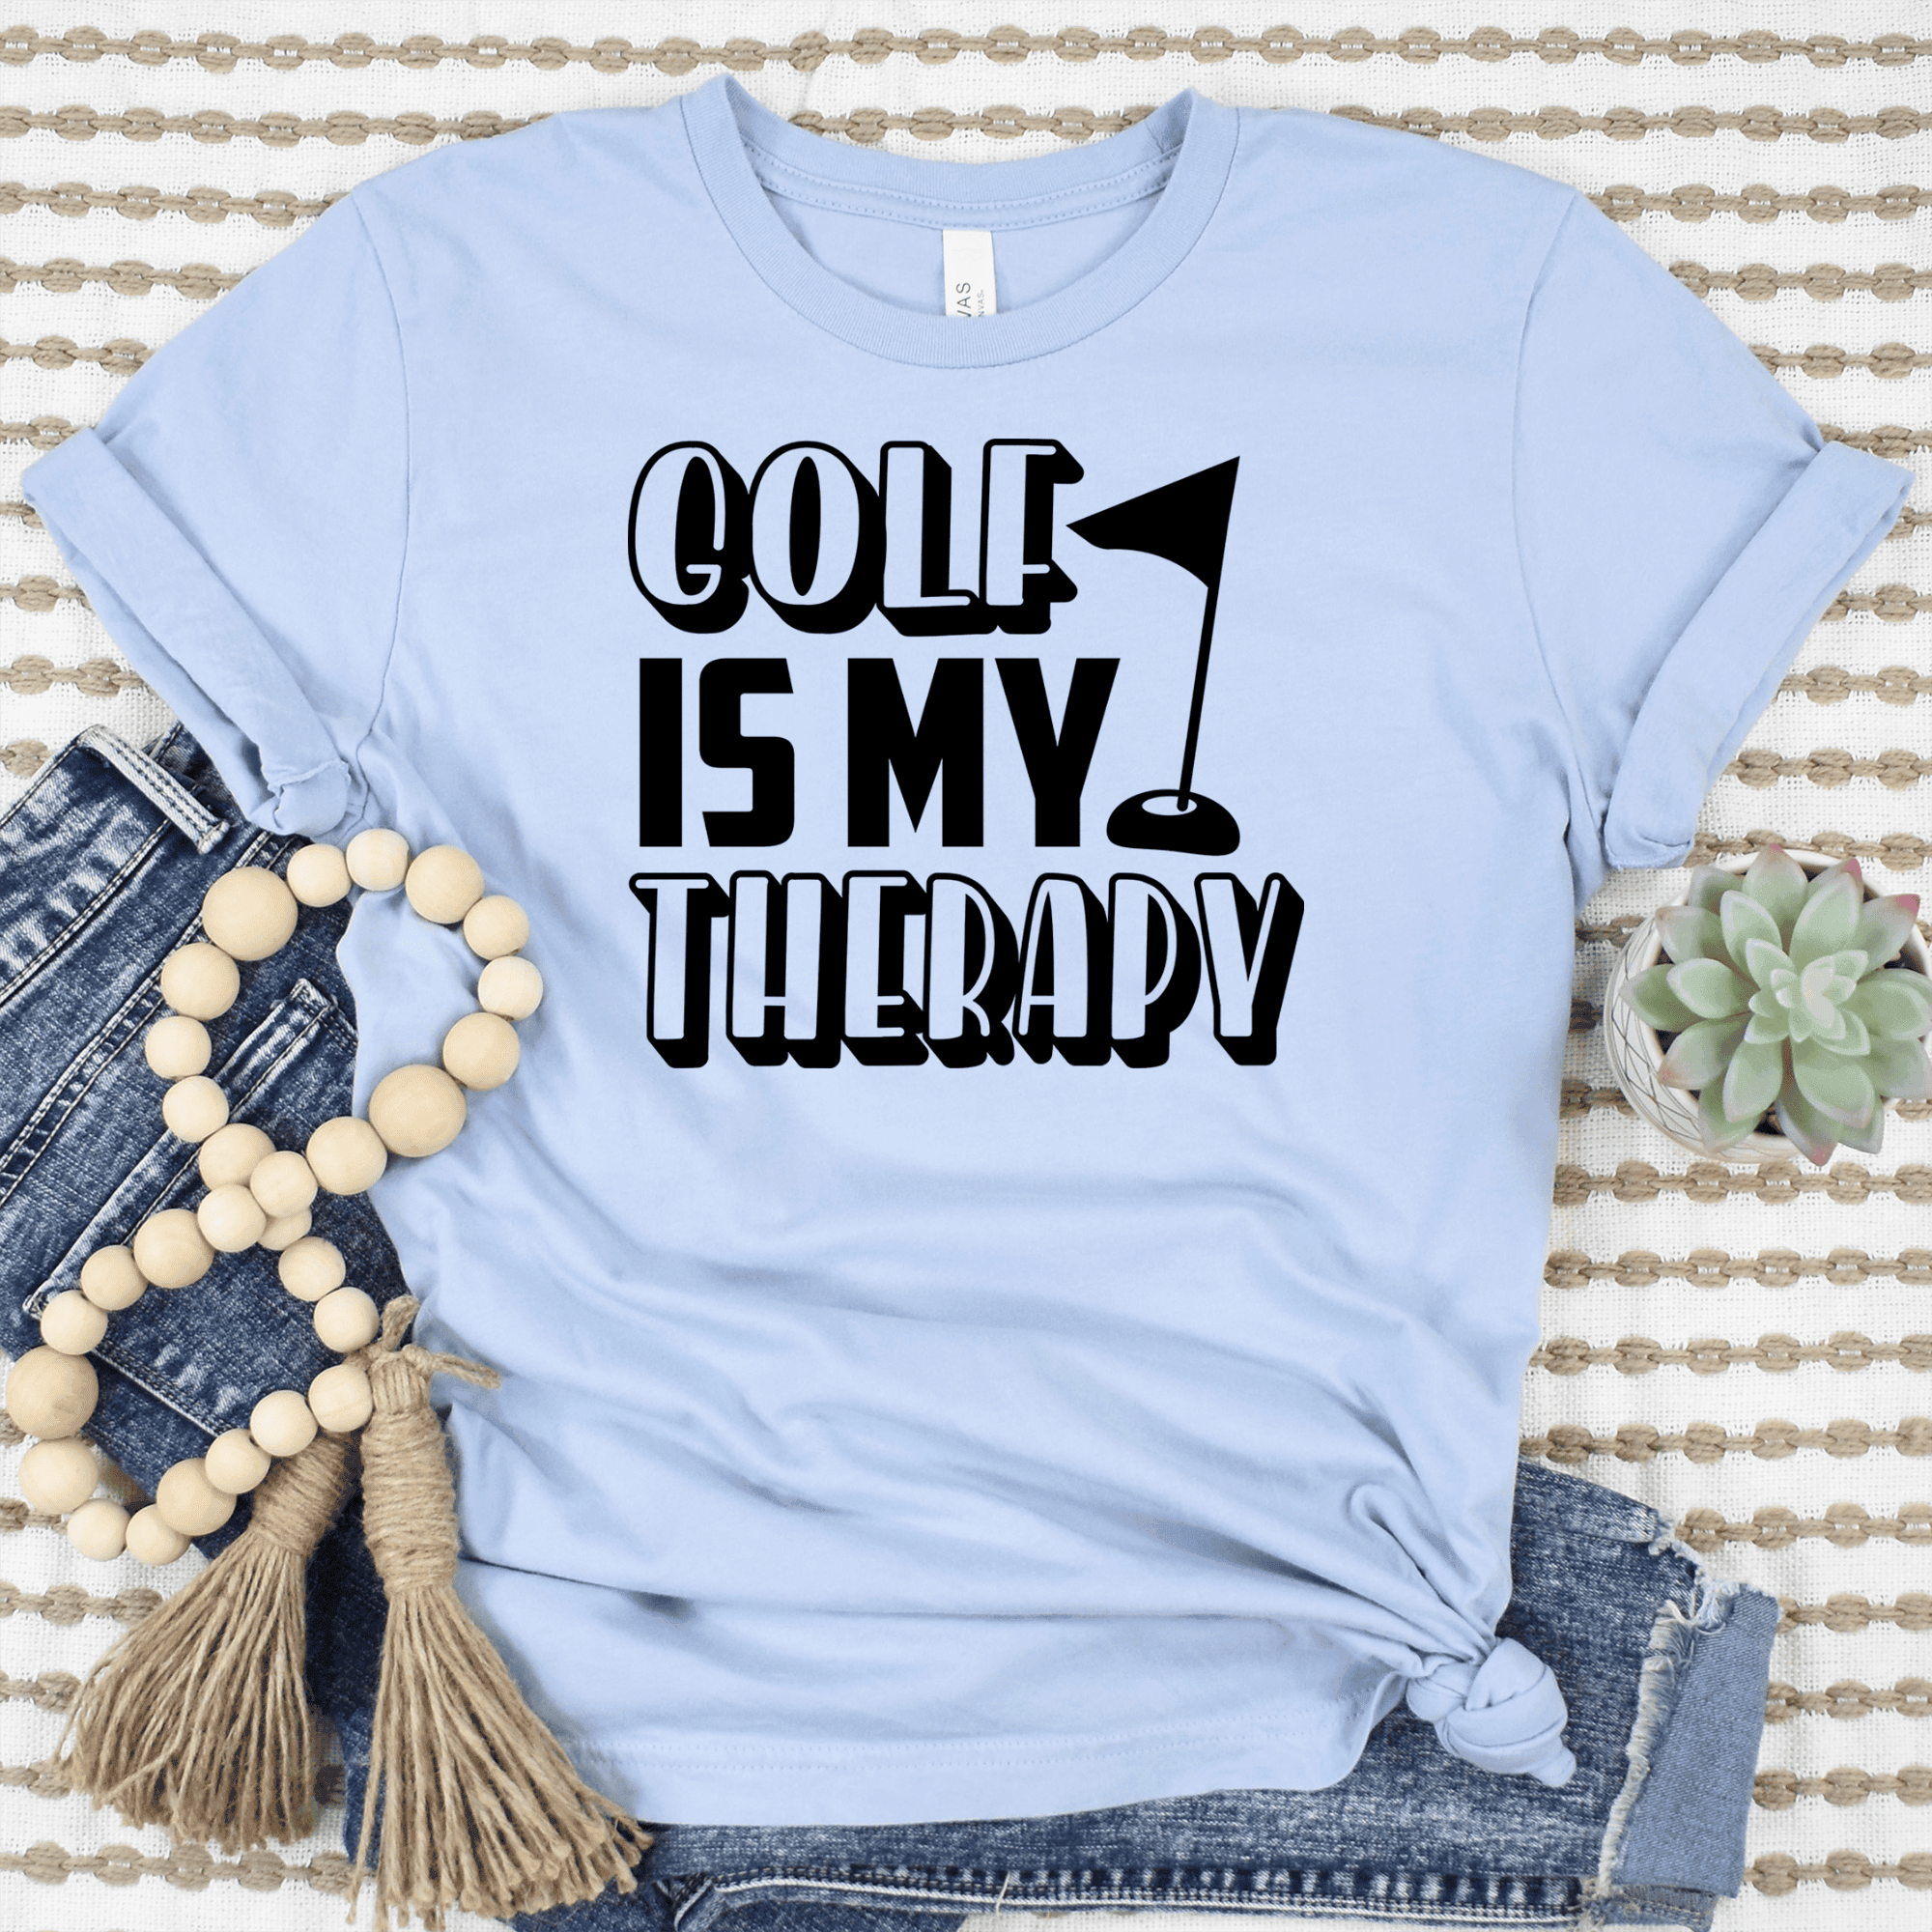 Womens Light Blue T Shirt with My-Real-Therapy design